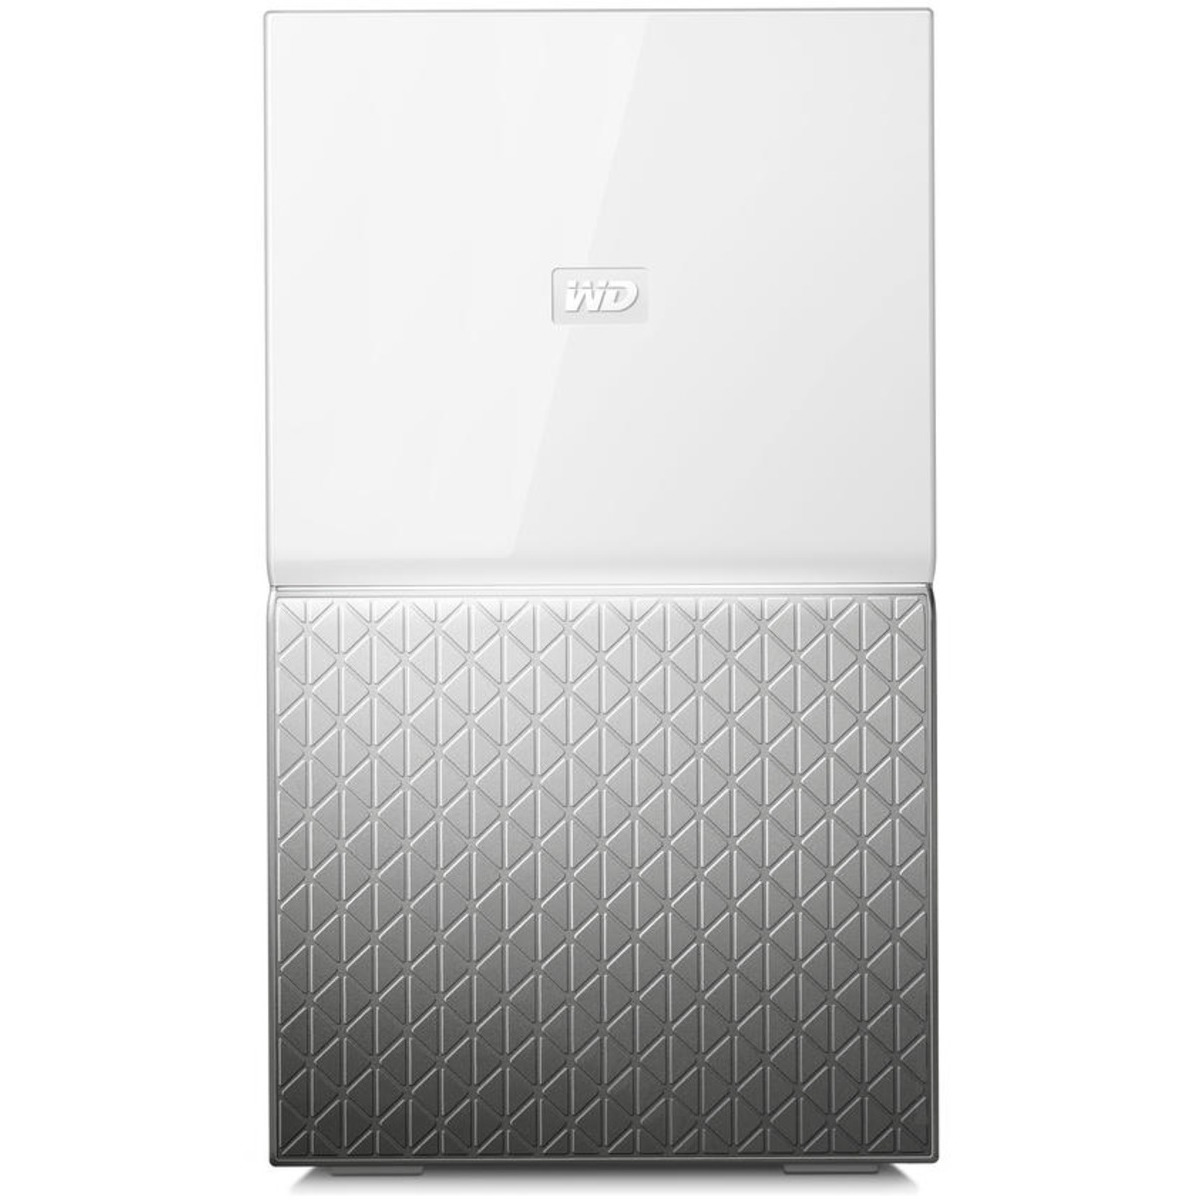 Western Digital My Cloud Home Duo 14tb 2-Bay Desktop Personal / Basic Home / Small Office DAS - Direct Attached Storage Device 1x14tb Western Digital Ultrastar DC HC530 WUH721414ALE6L4 3.5 7200rpm SATA 6Gb/s HDD ENTERPRISE Class Drives Installed - Burn-In Tested My Cloud Home Duo